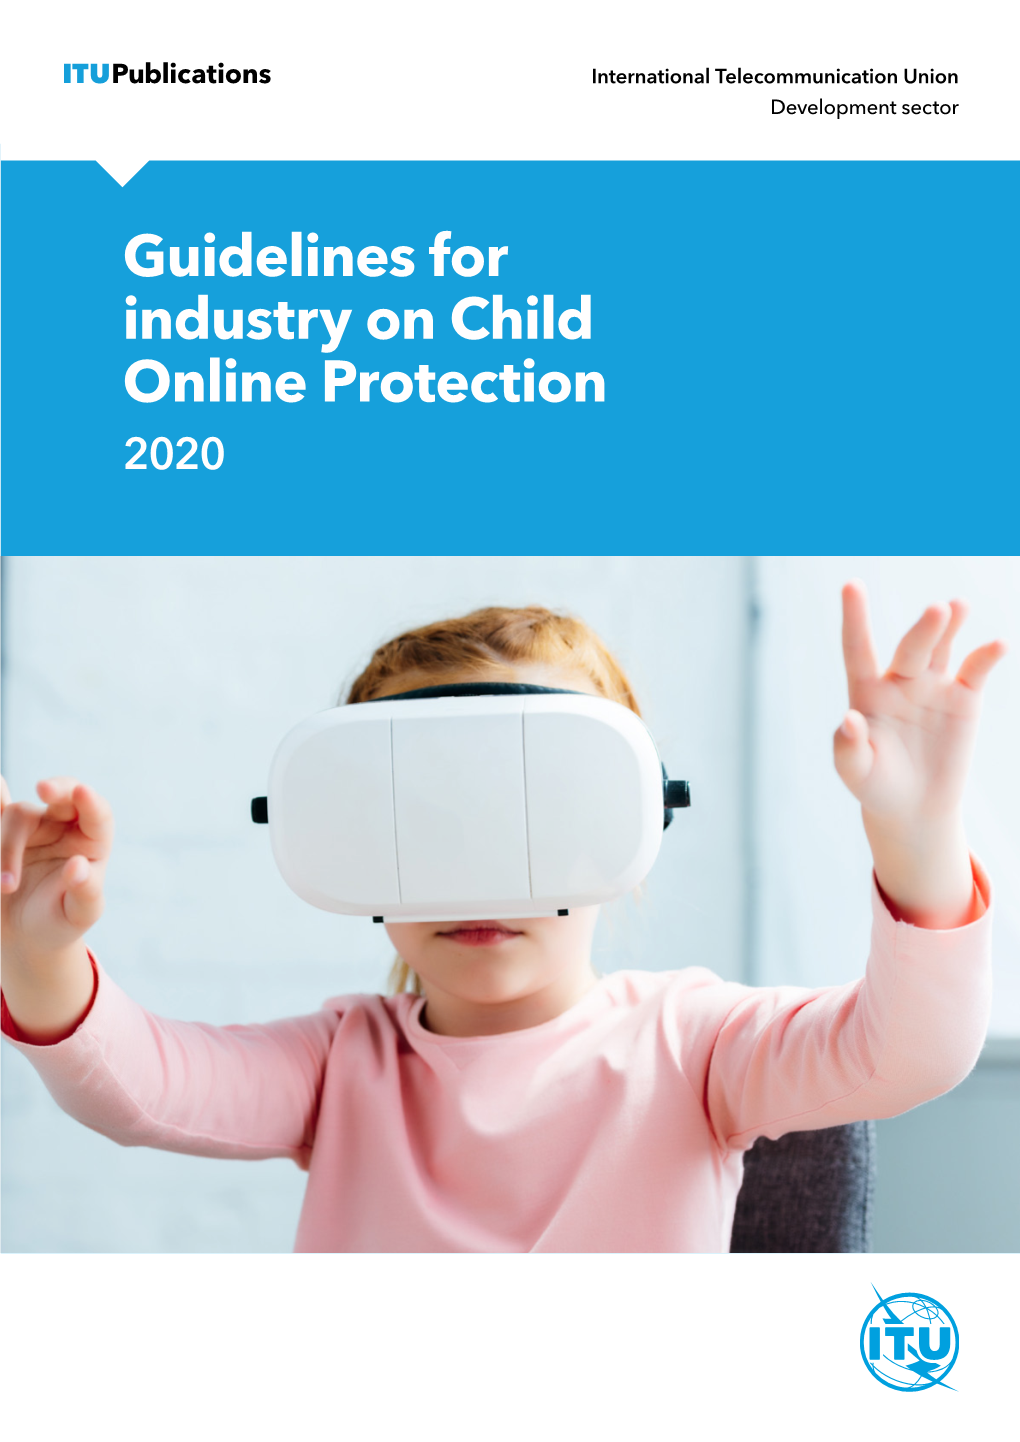 Guidelines for Industry on Child Online Protection 2020